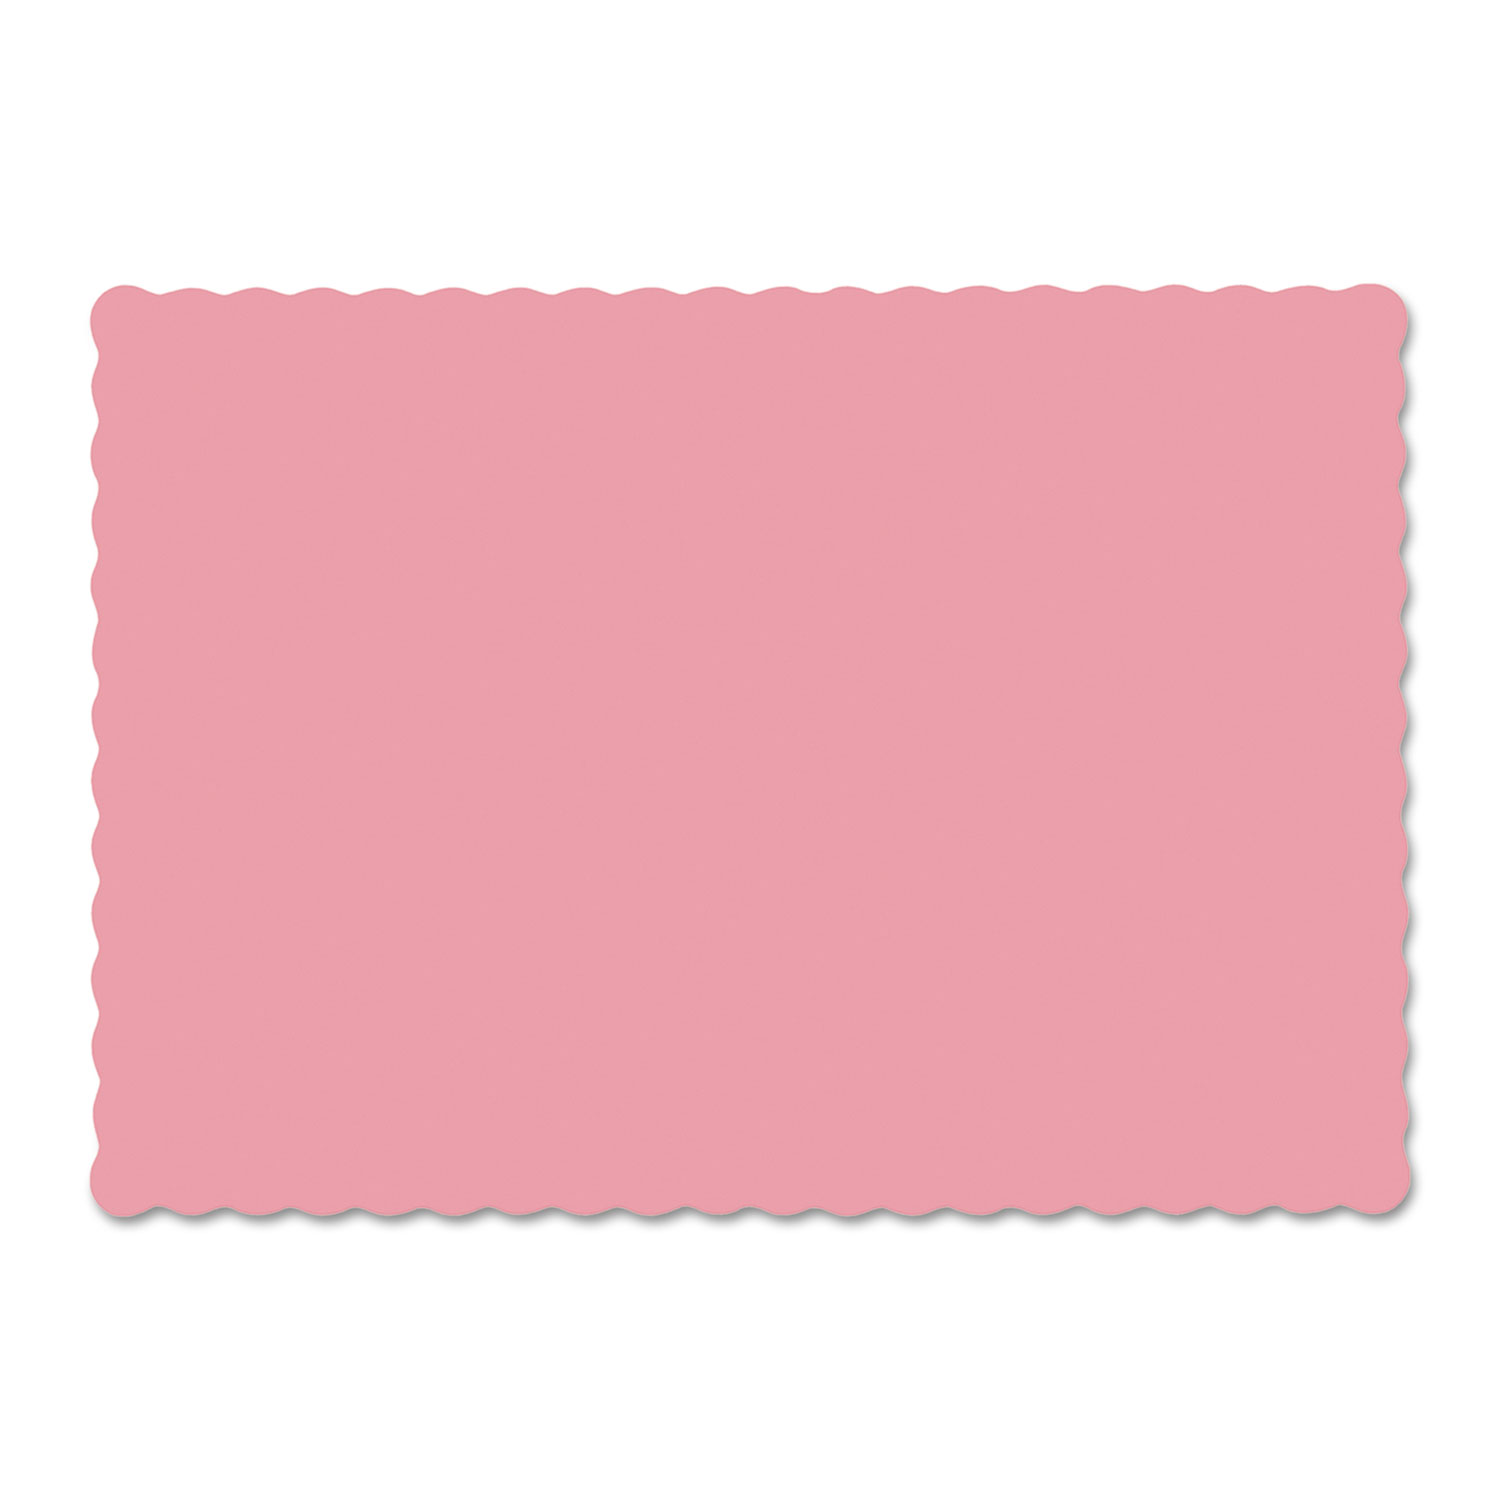 Solid Color Scalloped Edge Placemats, 9 1/2 x 13 1/2, Dusty Rose, 1000/Carton